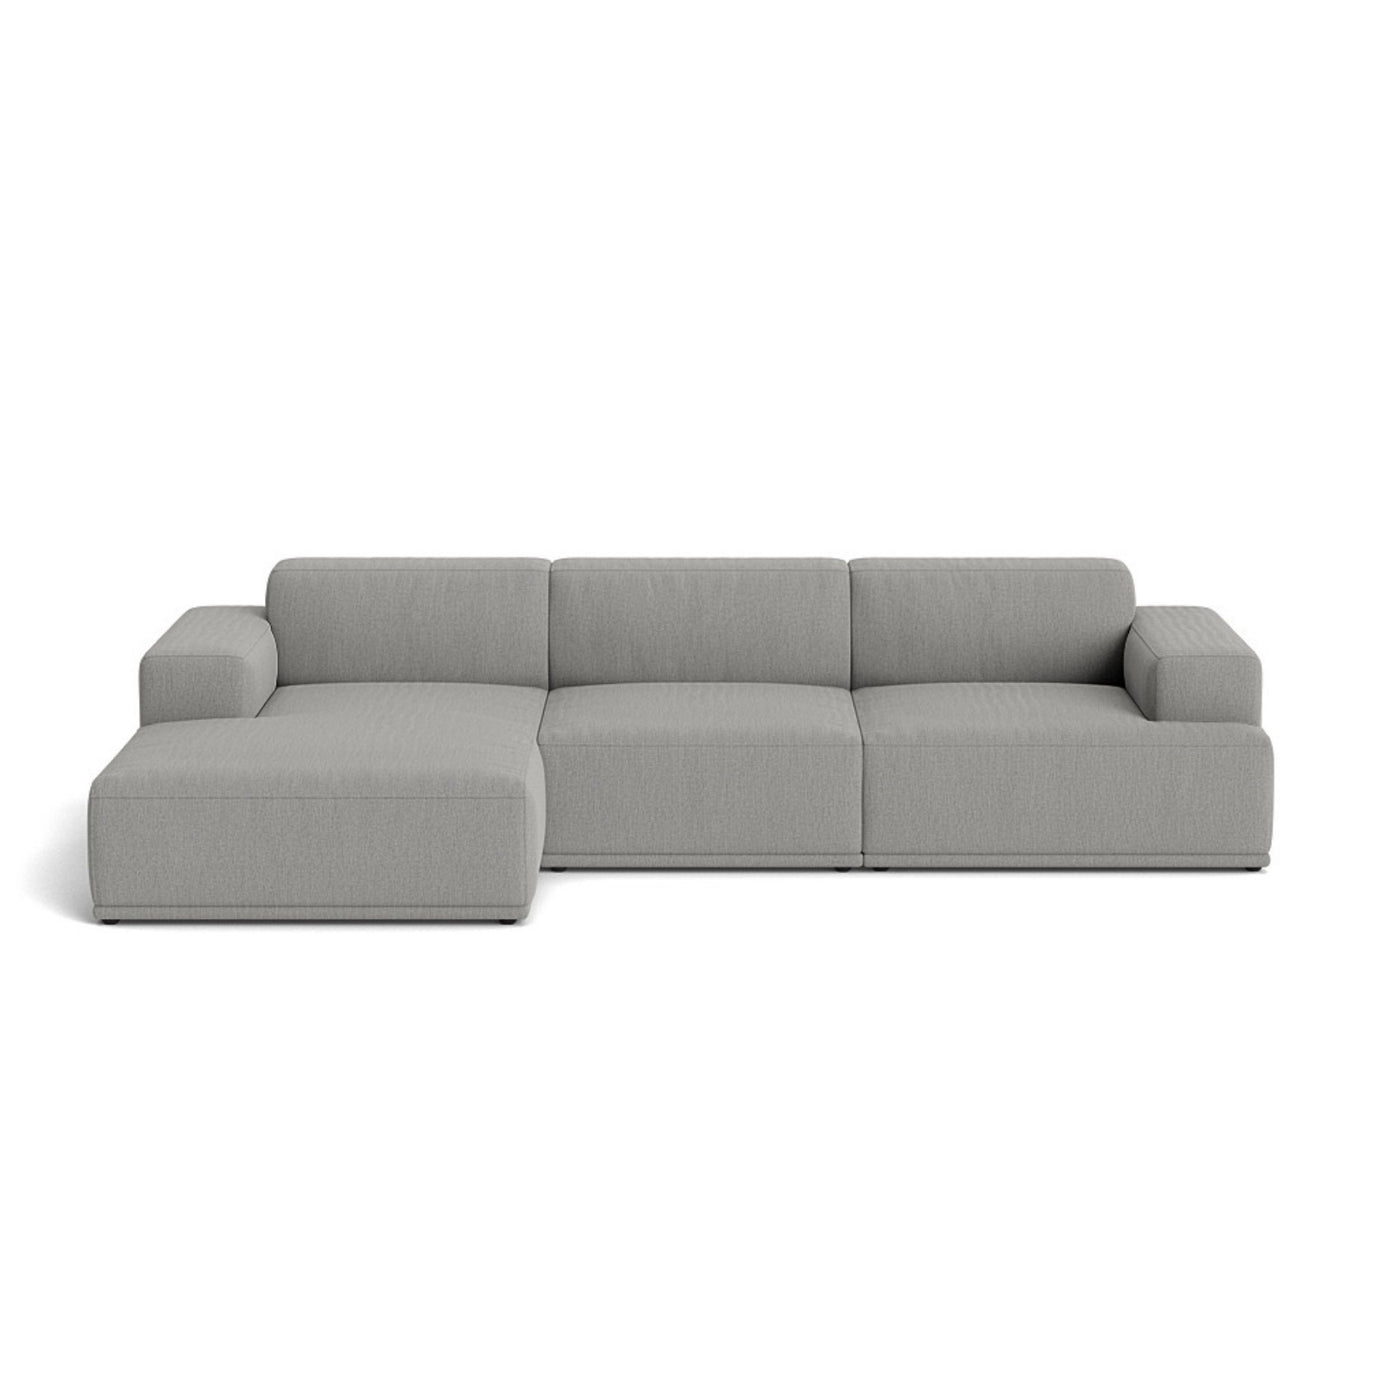 Muuto Connect Soft Modular 3 Seater Sofa, configuration 3. Made-to-order from someday designs. #colour_re-wool-128